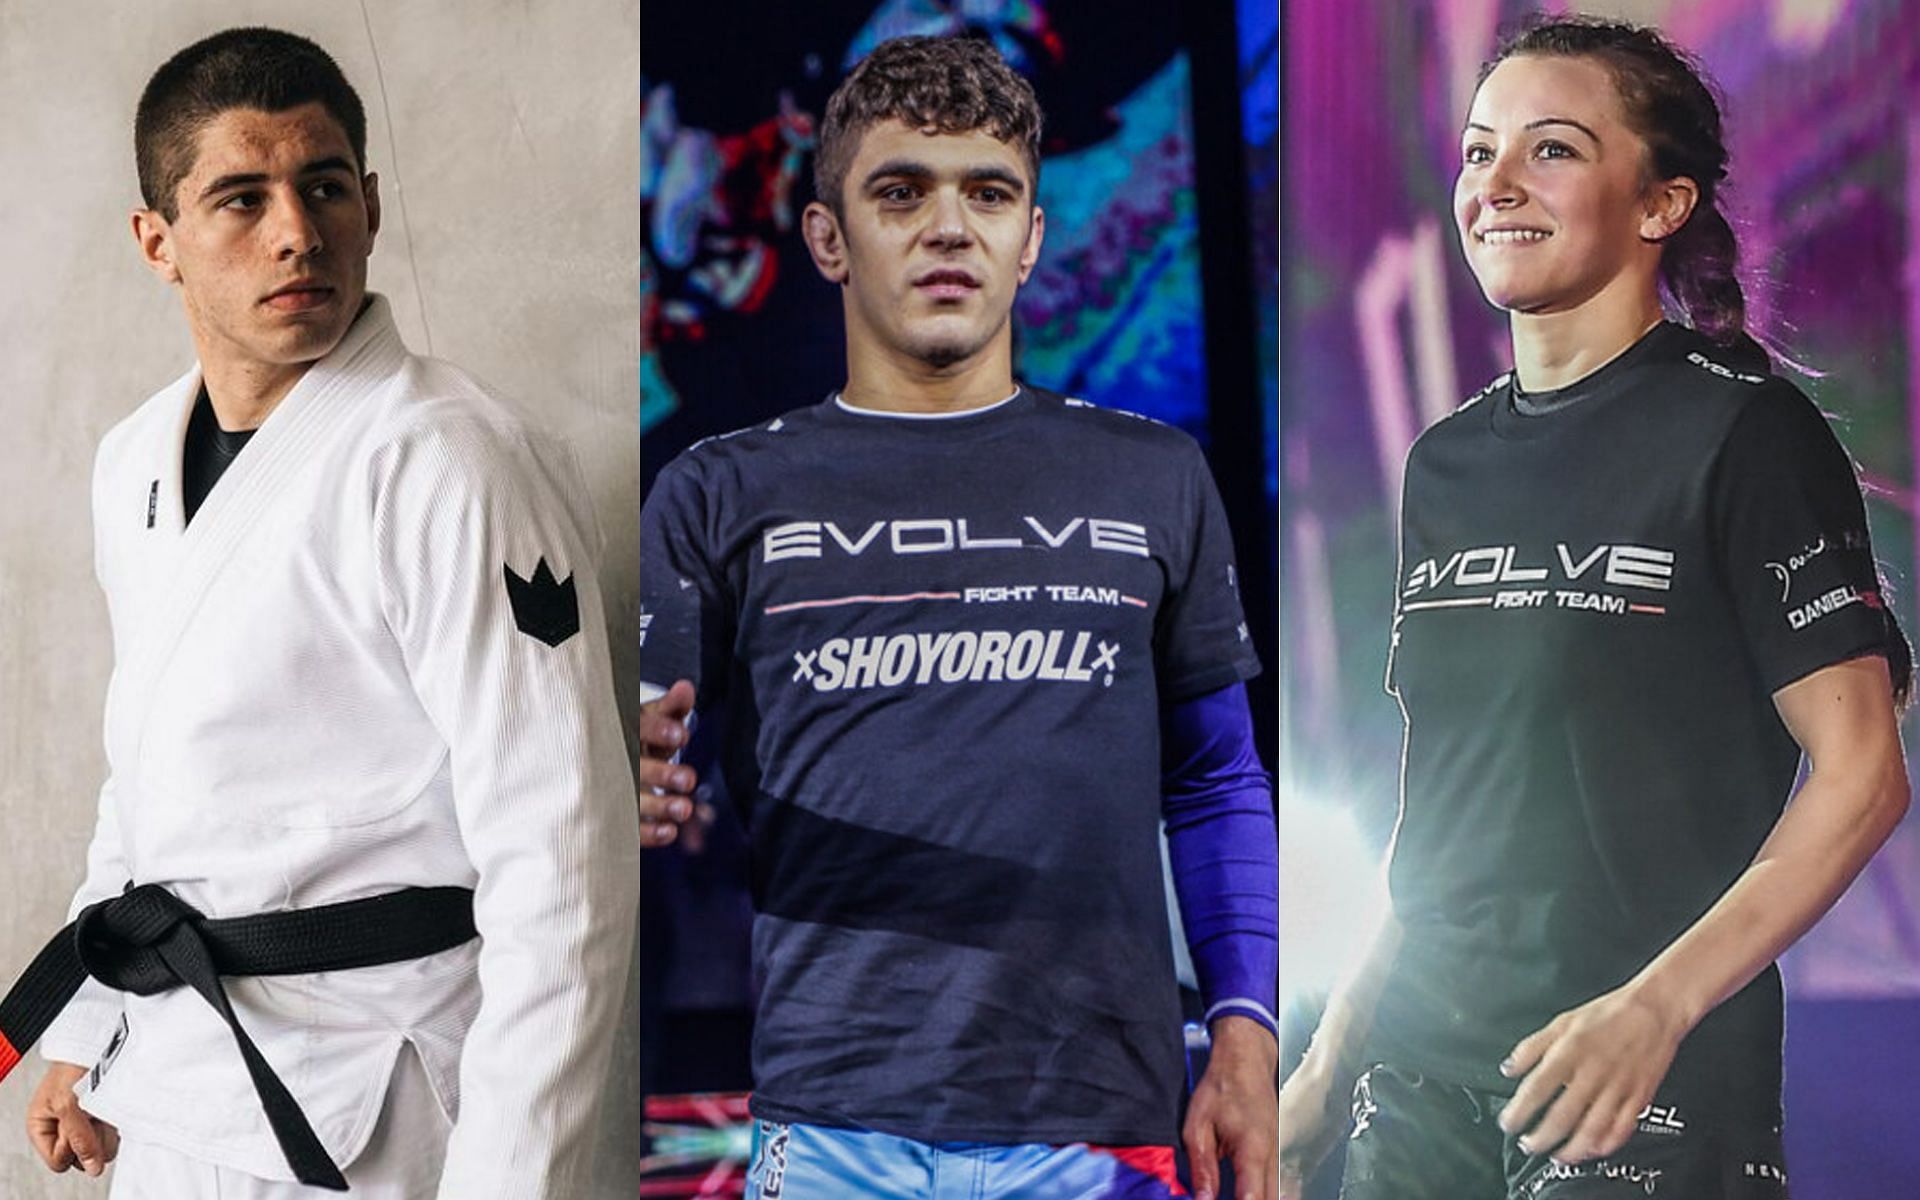 Fans shared some interesting matchups for Tainan Dalpra (L), Mikey Musumeci (C), and Danielle Kelly, among others. | [Photos: @tainandalpra on Instagram/ONE Championship]